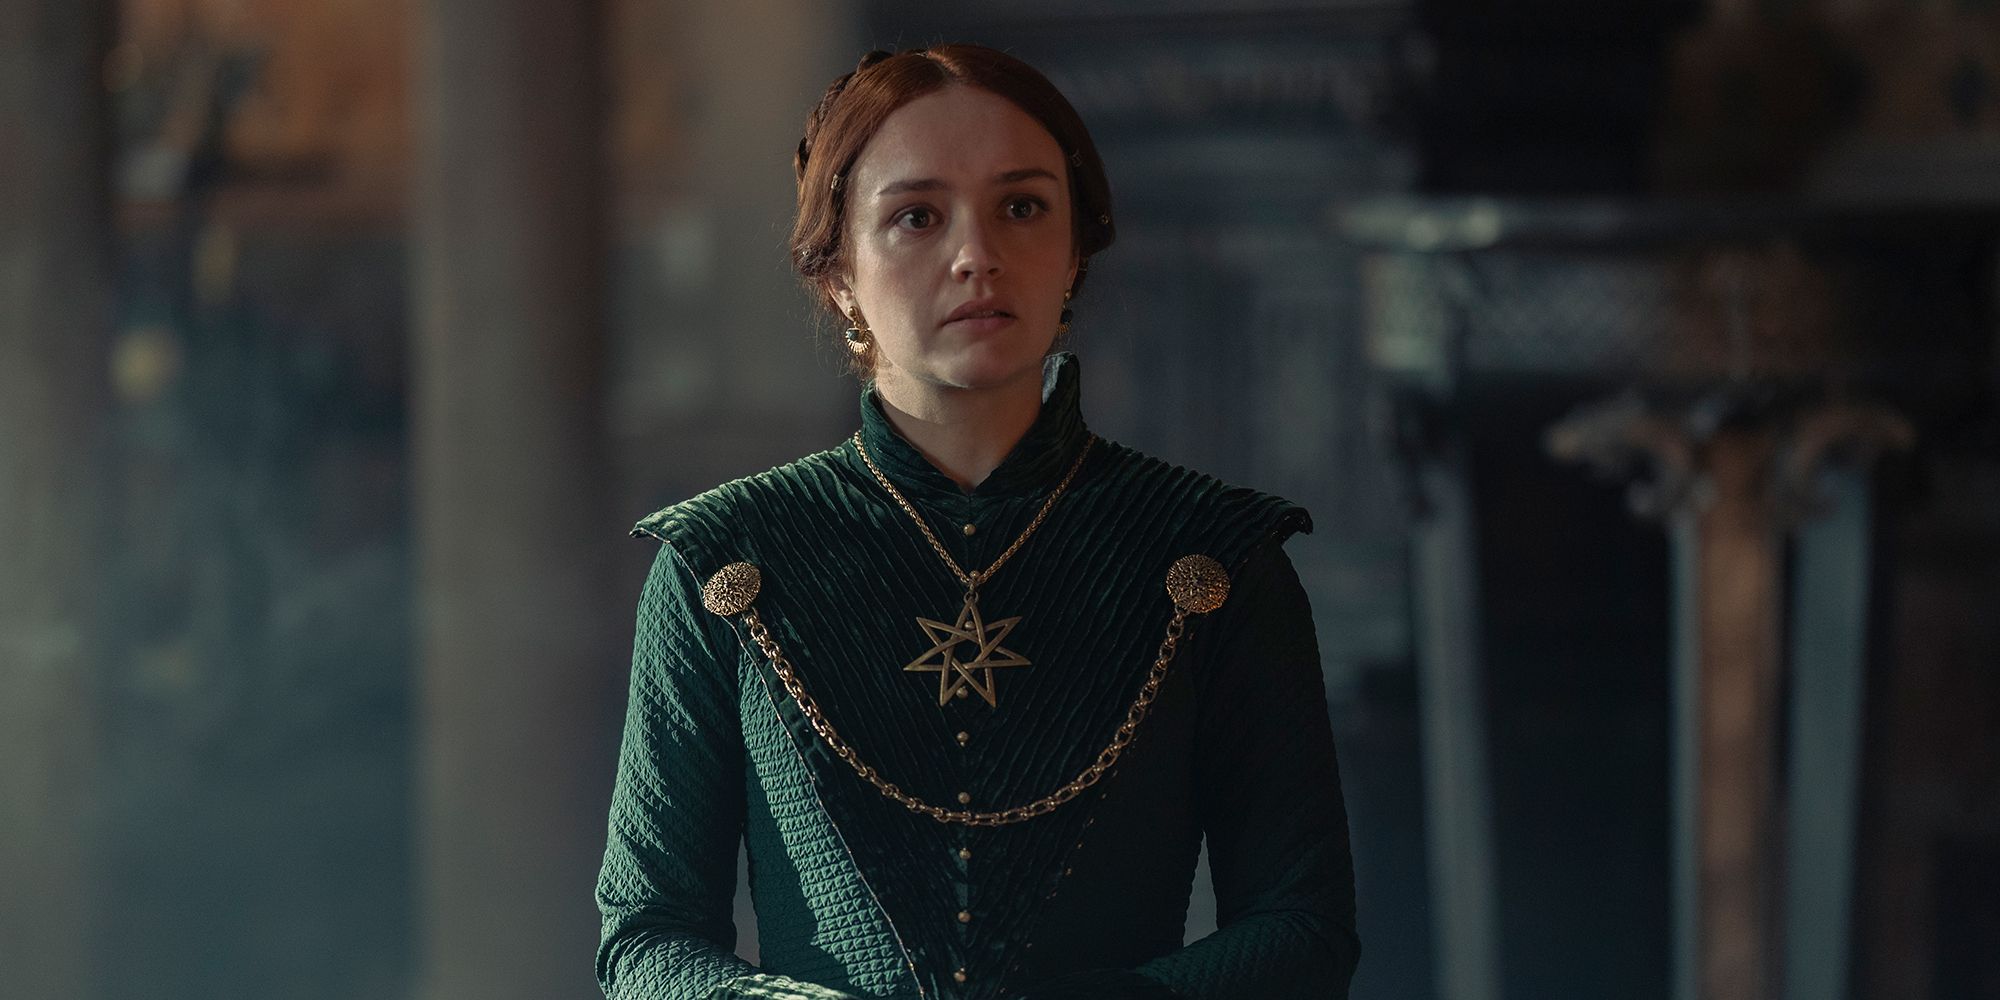 Olivia Cooke as Alicent Hightower looking upset in House of the Dragon